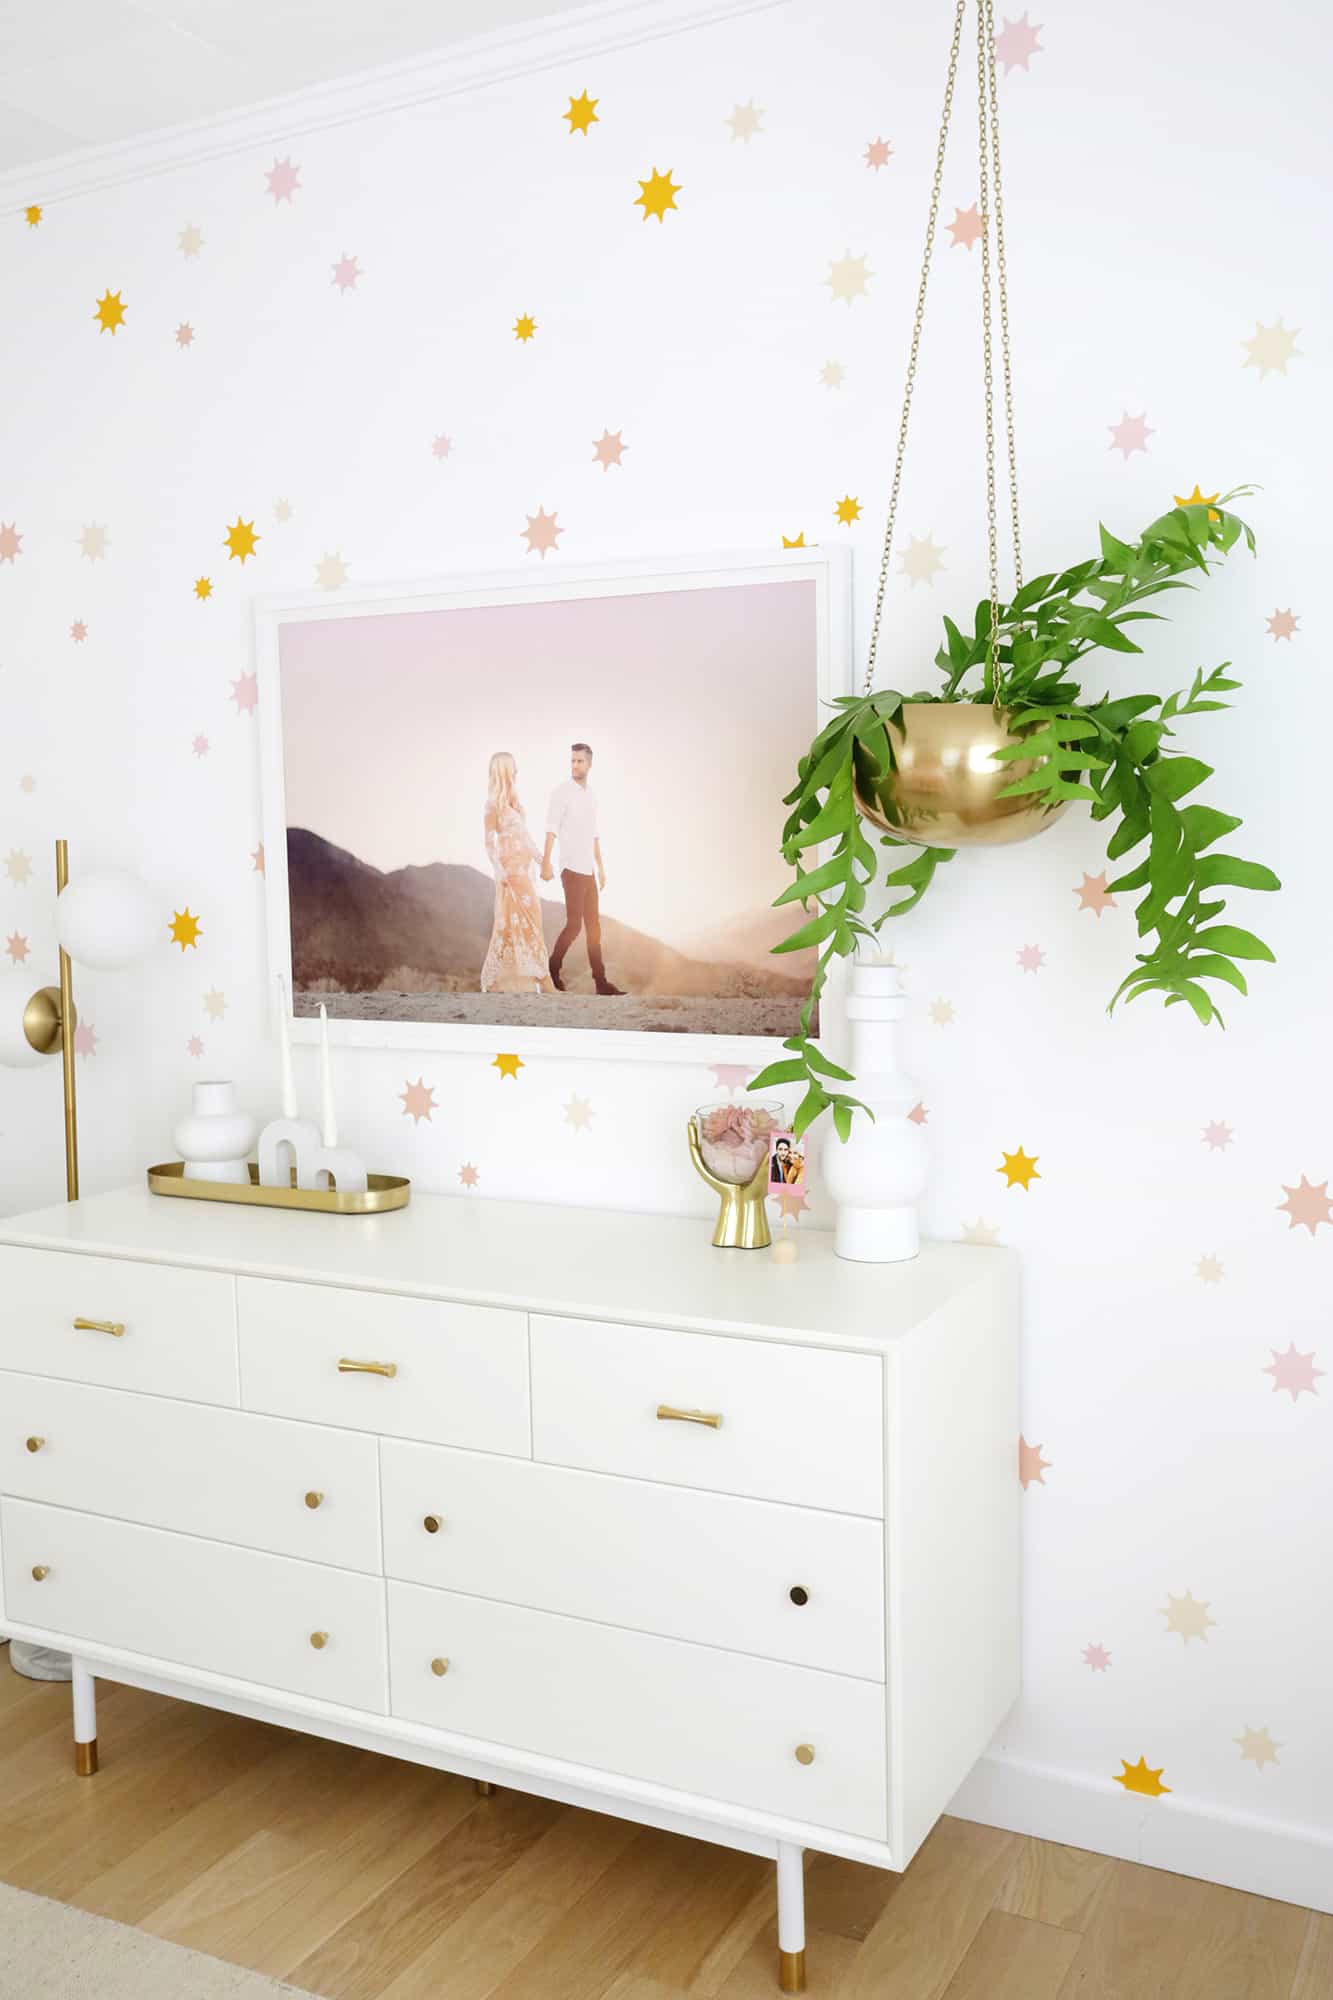 star wallpaper with wardrobe and hanging plant